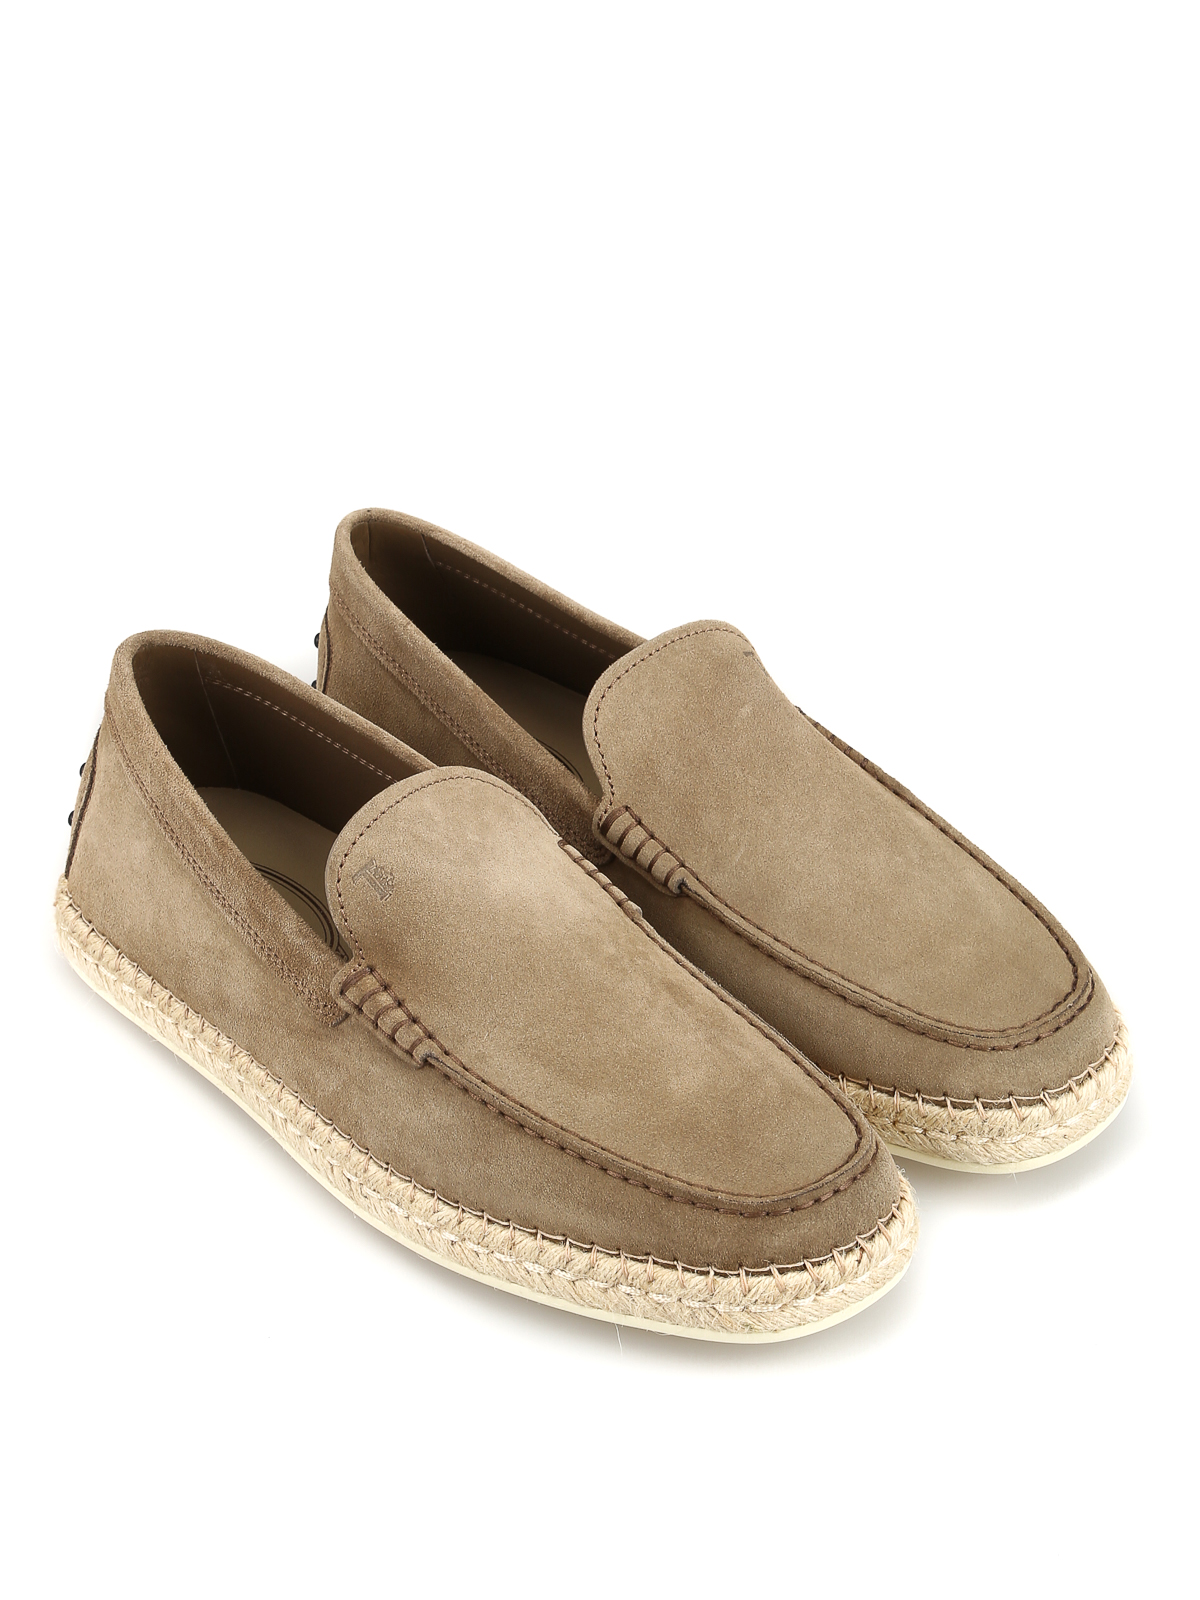 Tod'S - Espadrilles style suede loafers 